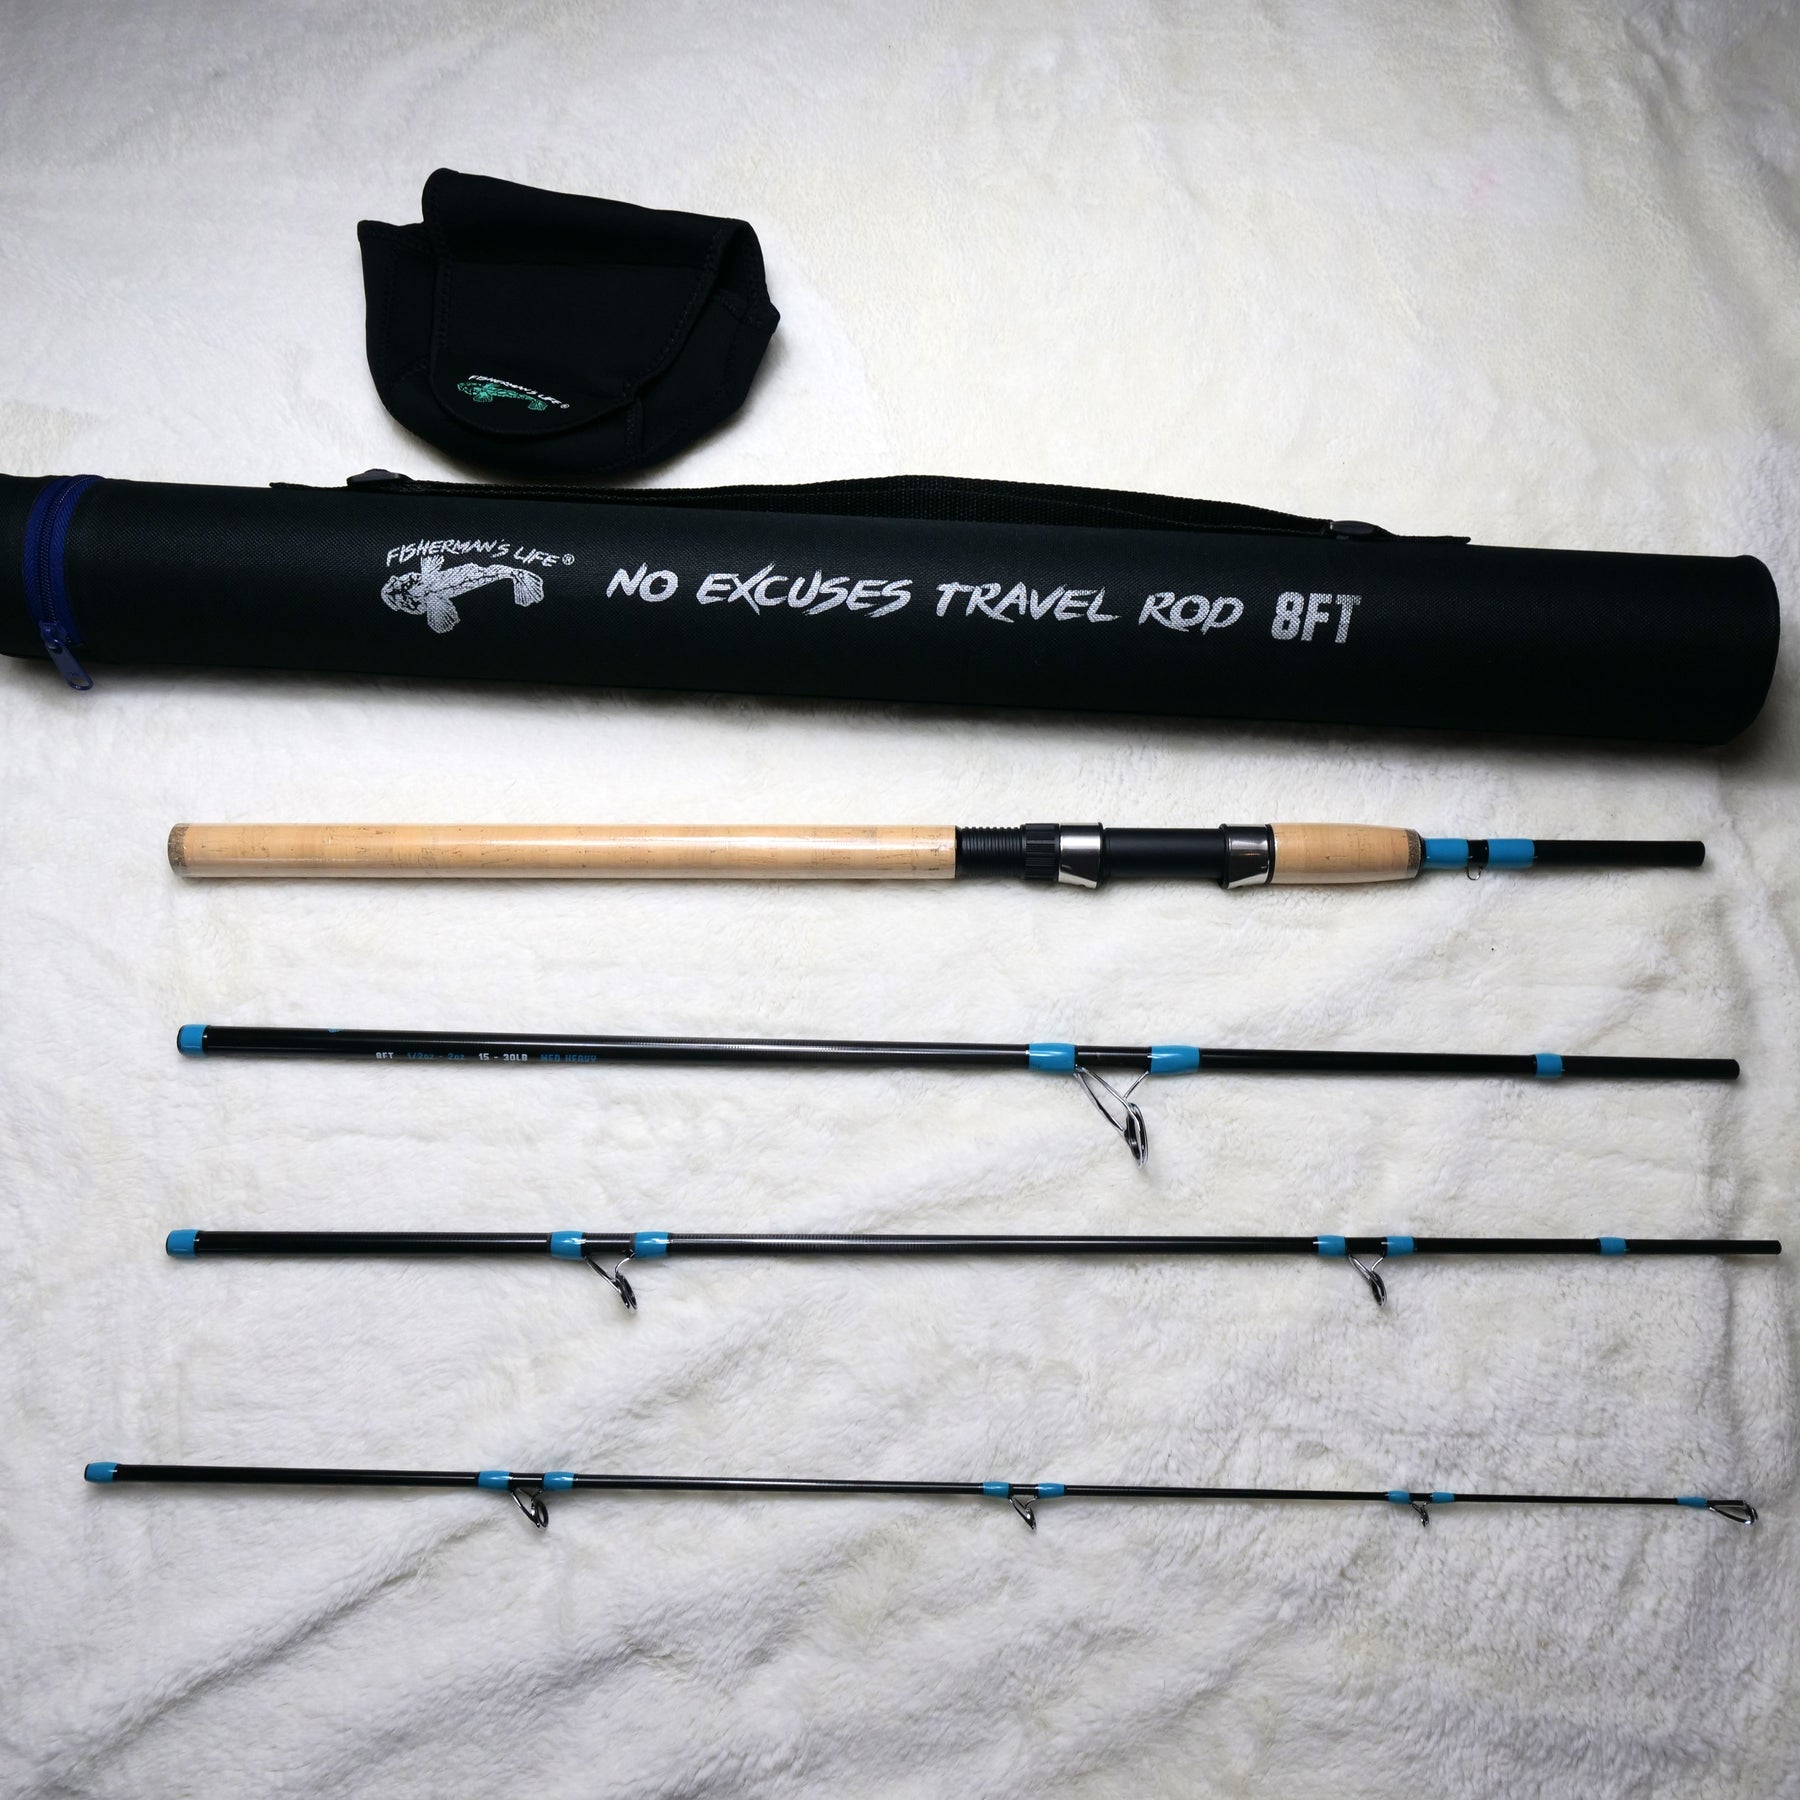 8Ft No Excuses Travel Rod with Tube Medium-Heavy Action 1/2oz to